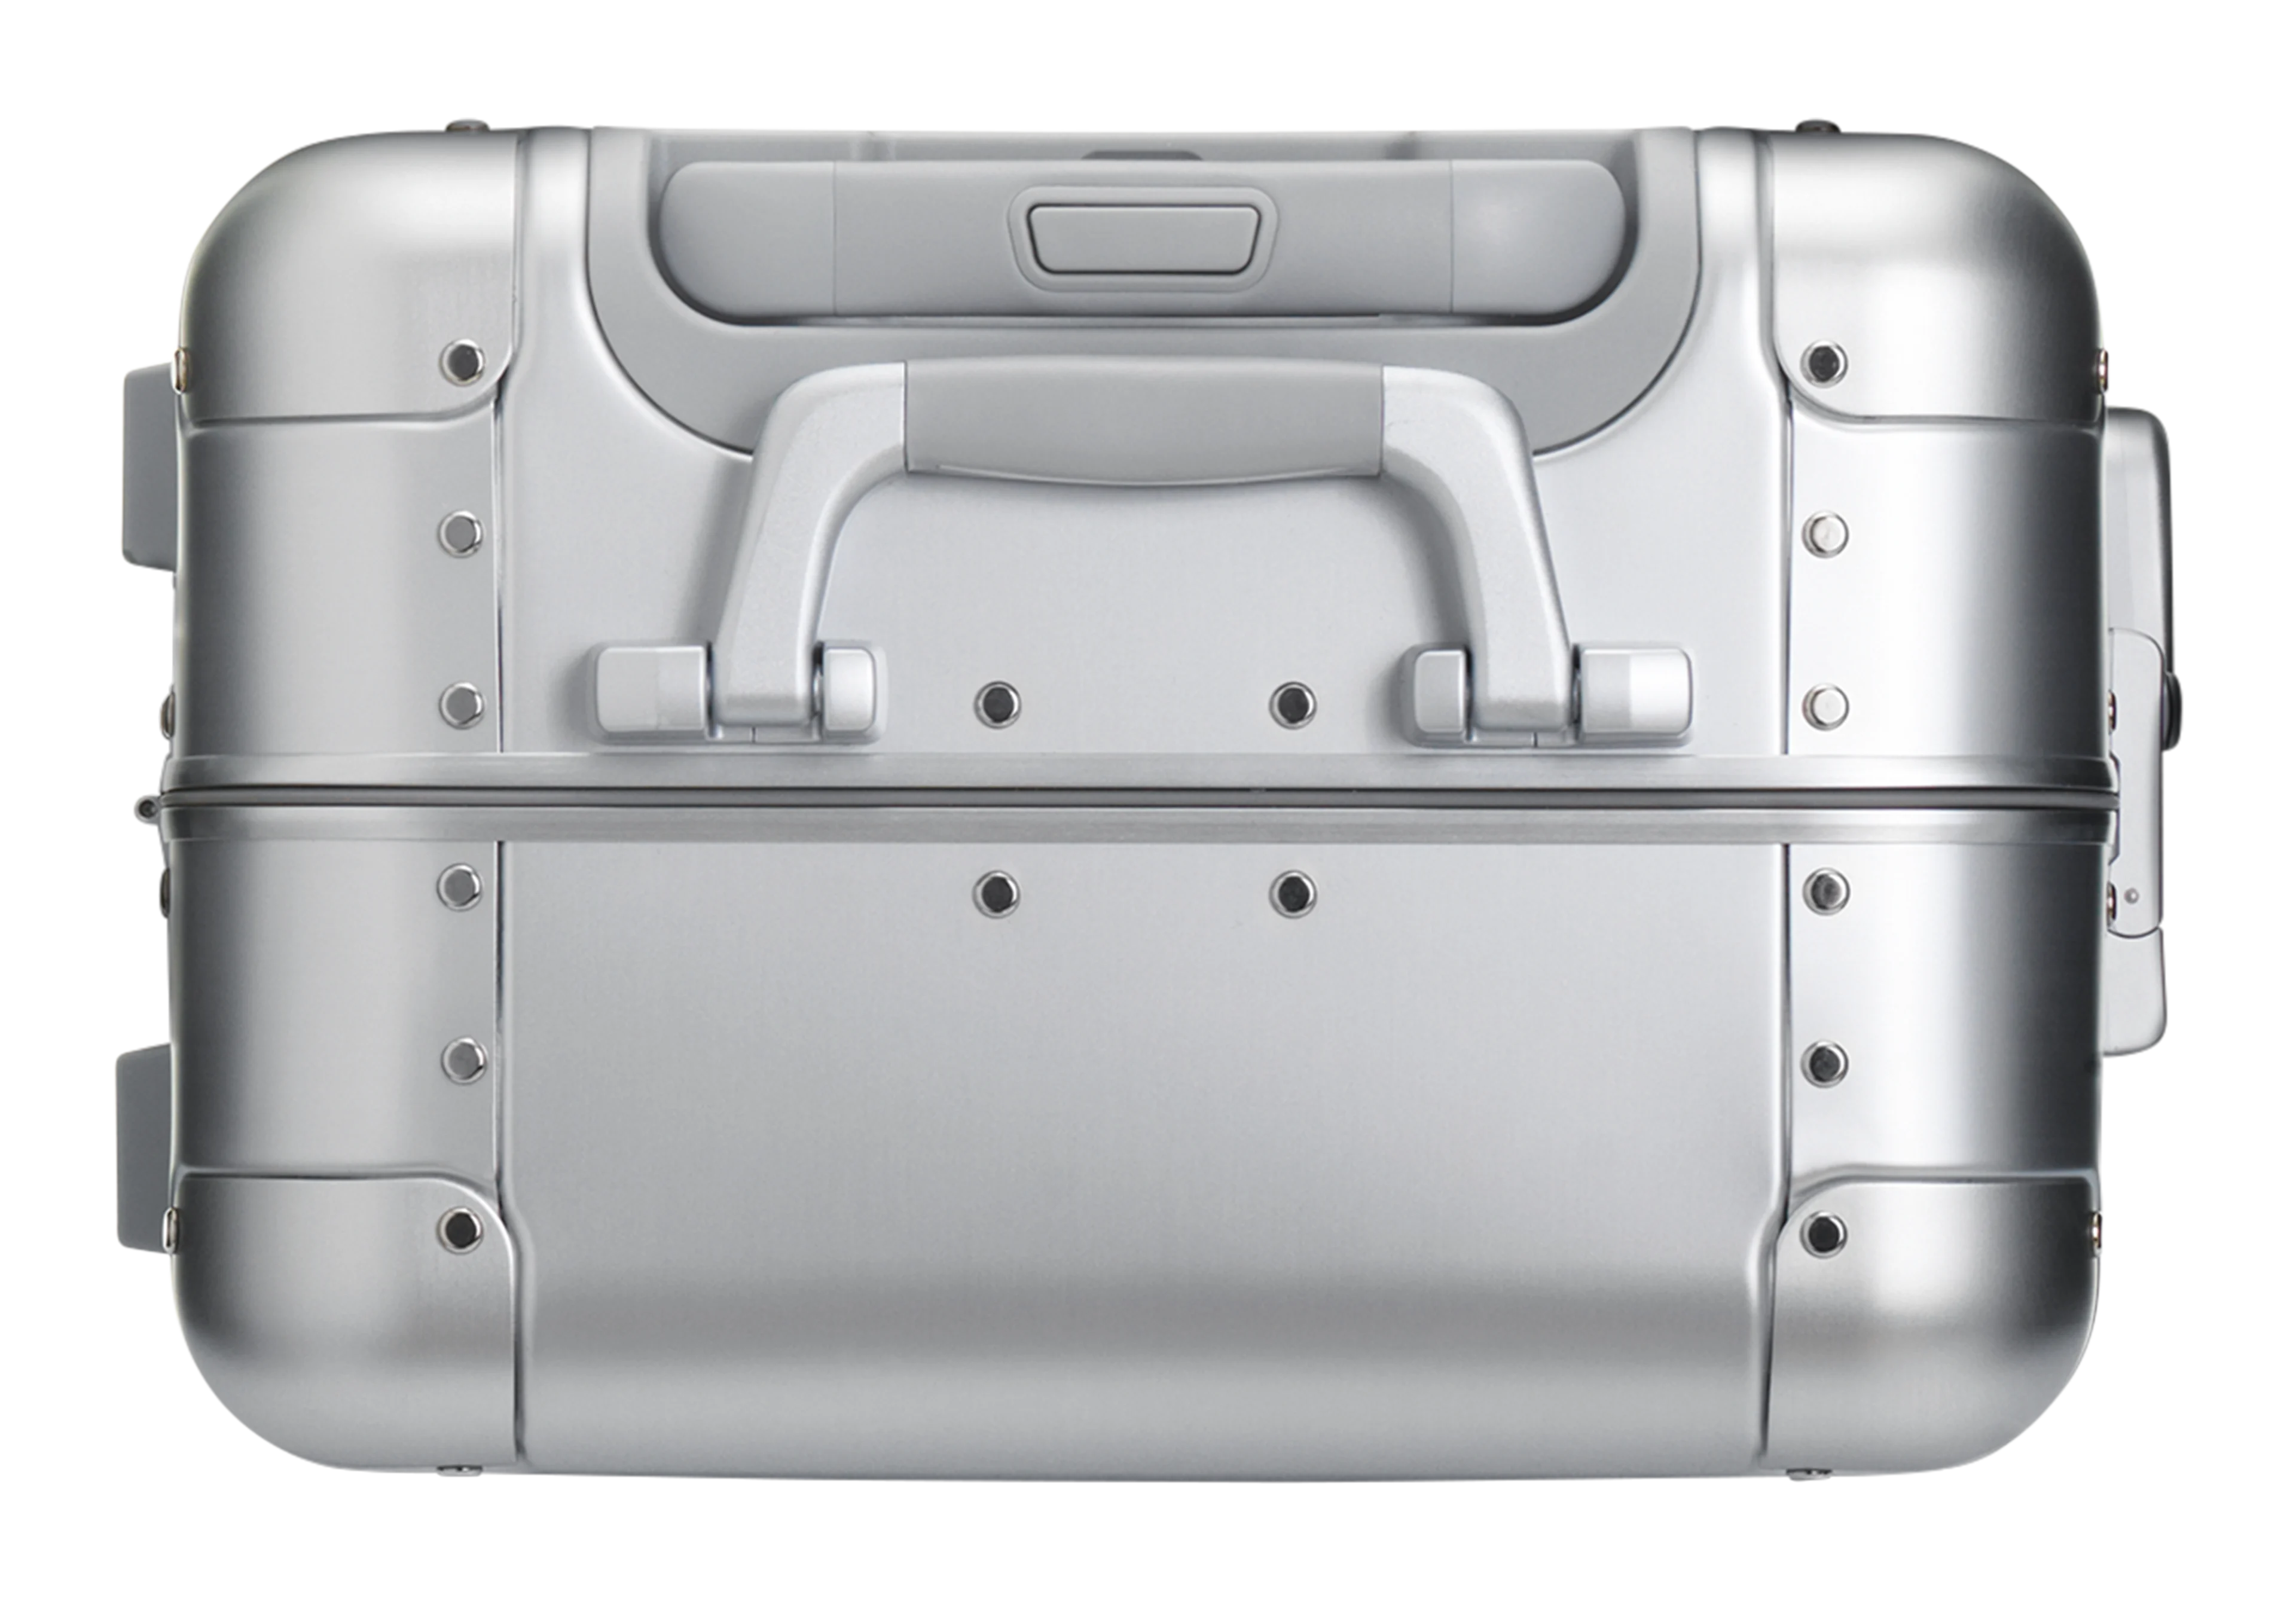 The Aluminum Carry-On in Silver